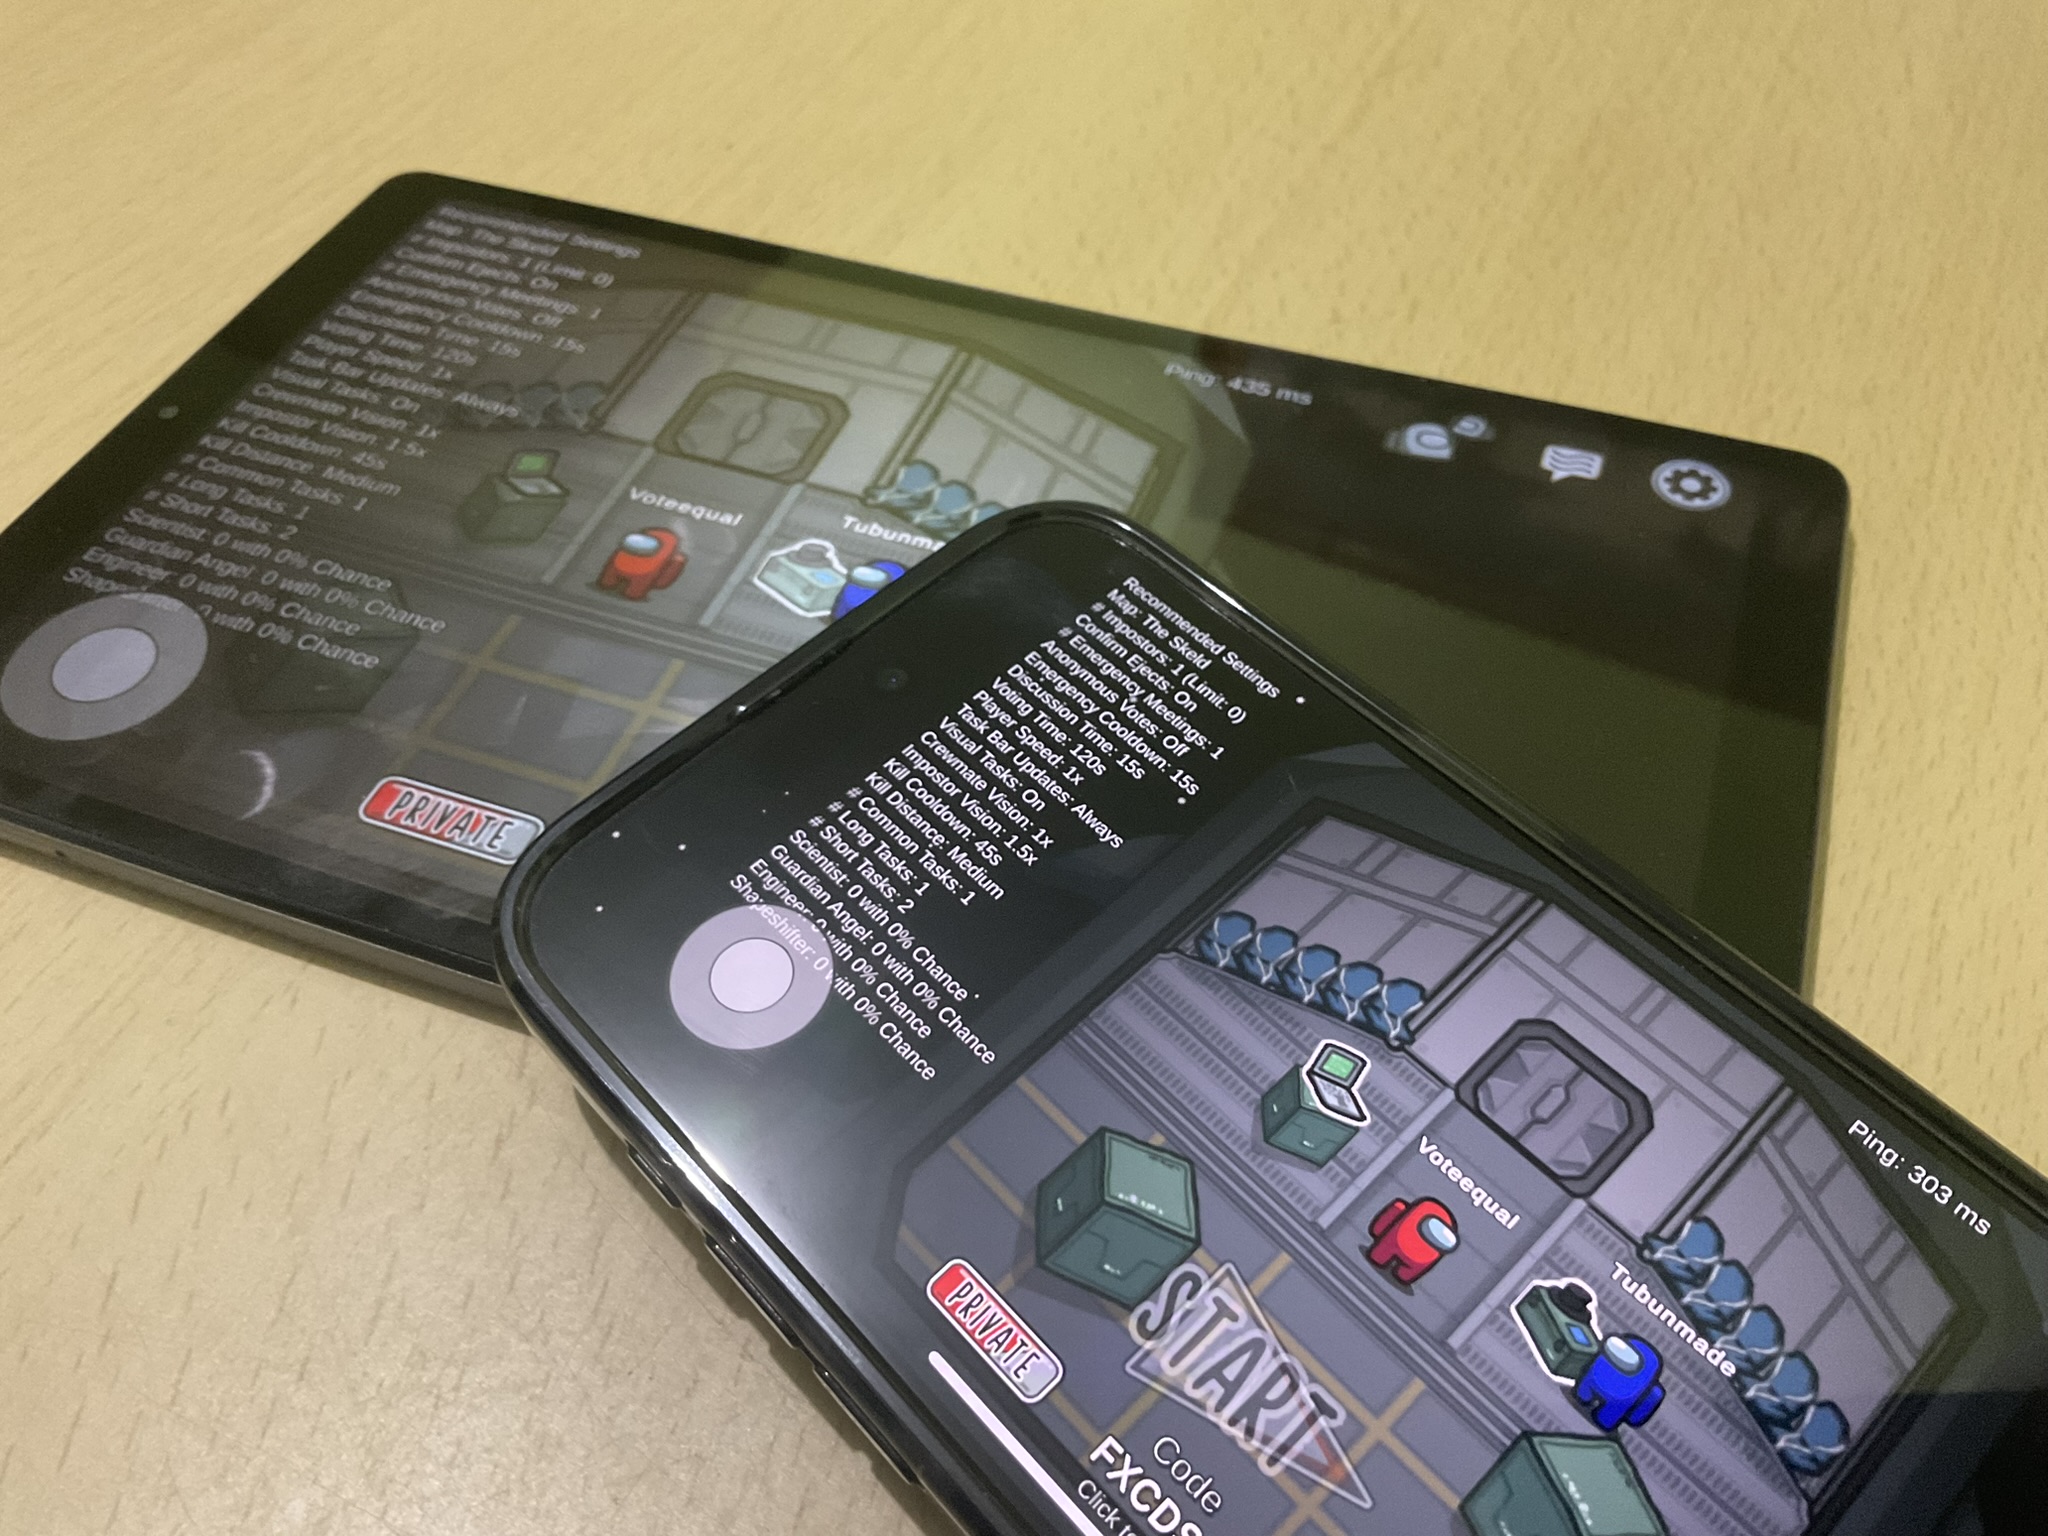 Games Android and iPhone Can Play Together